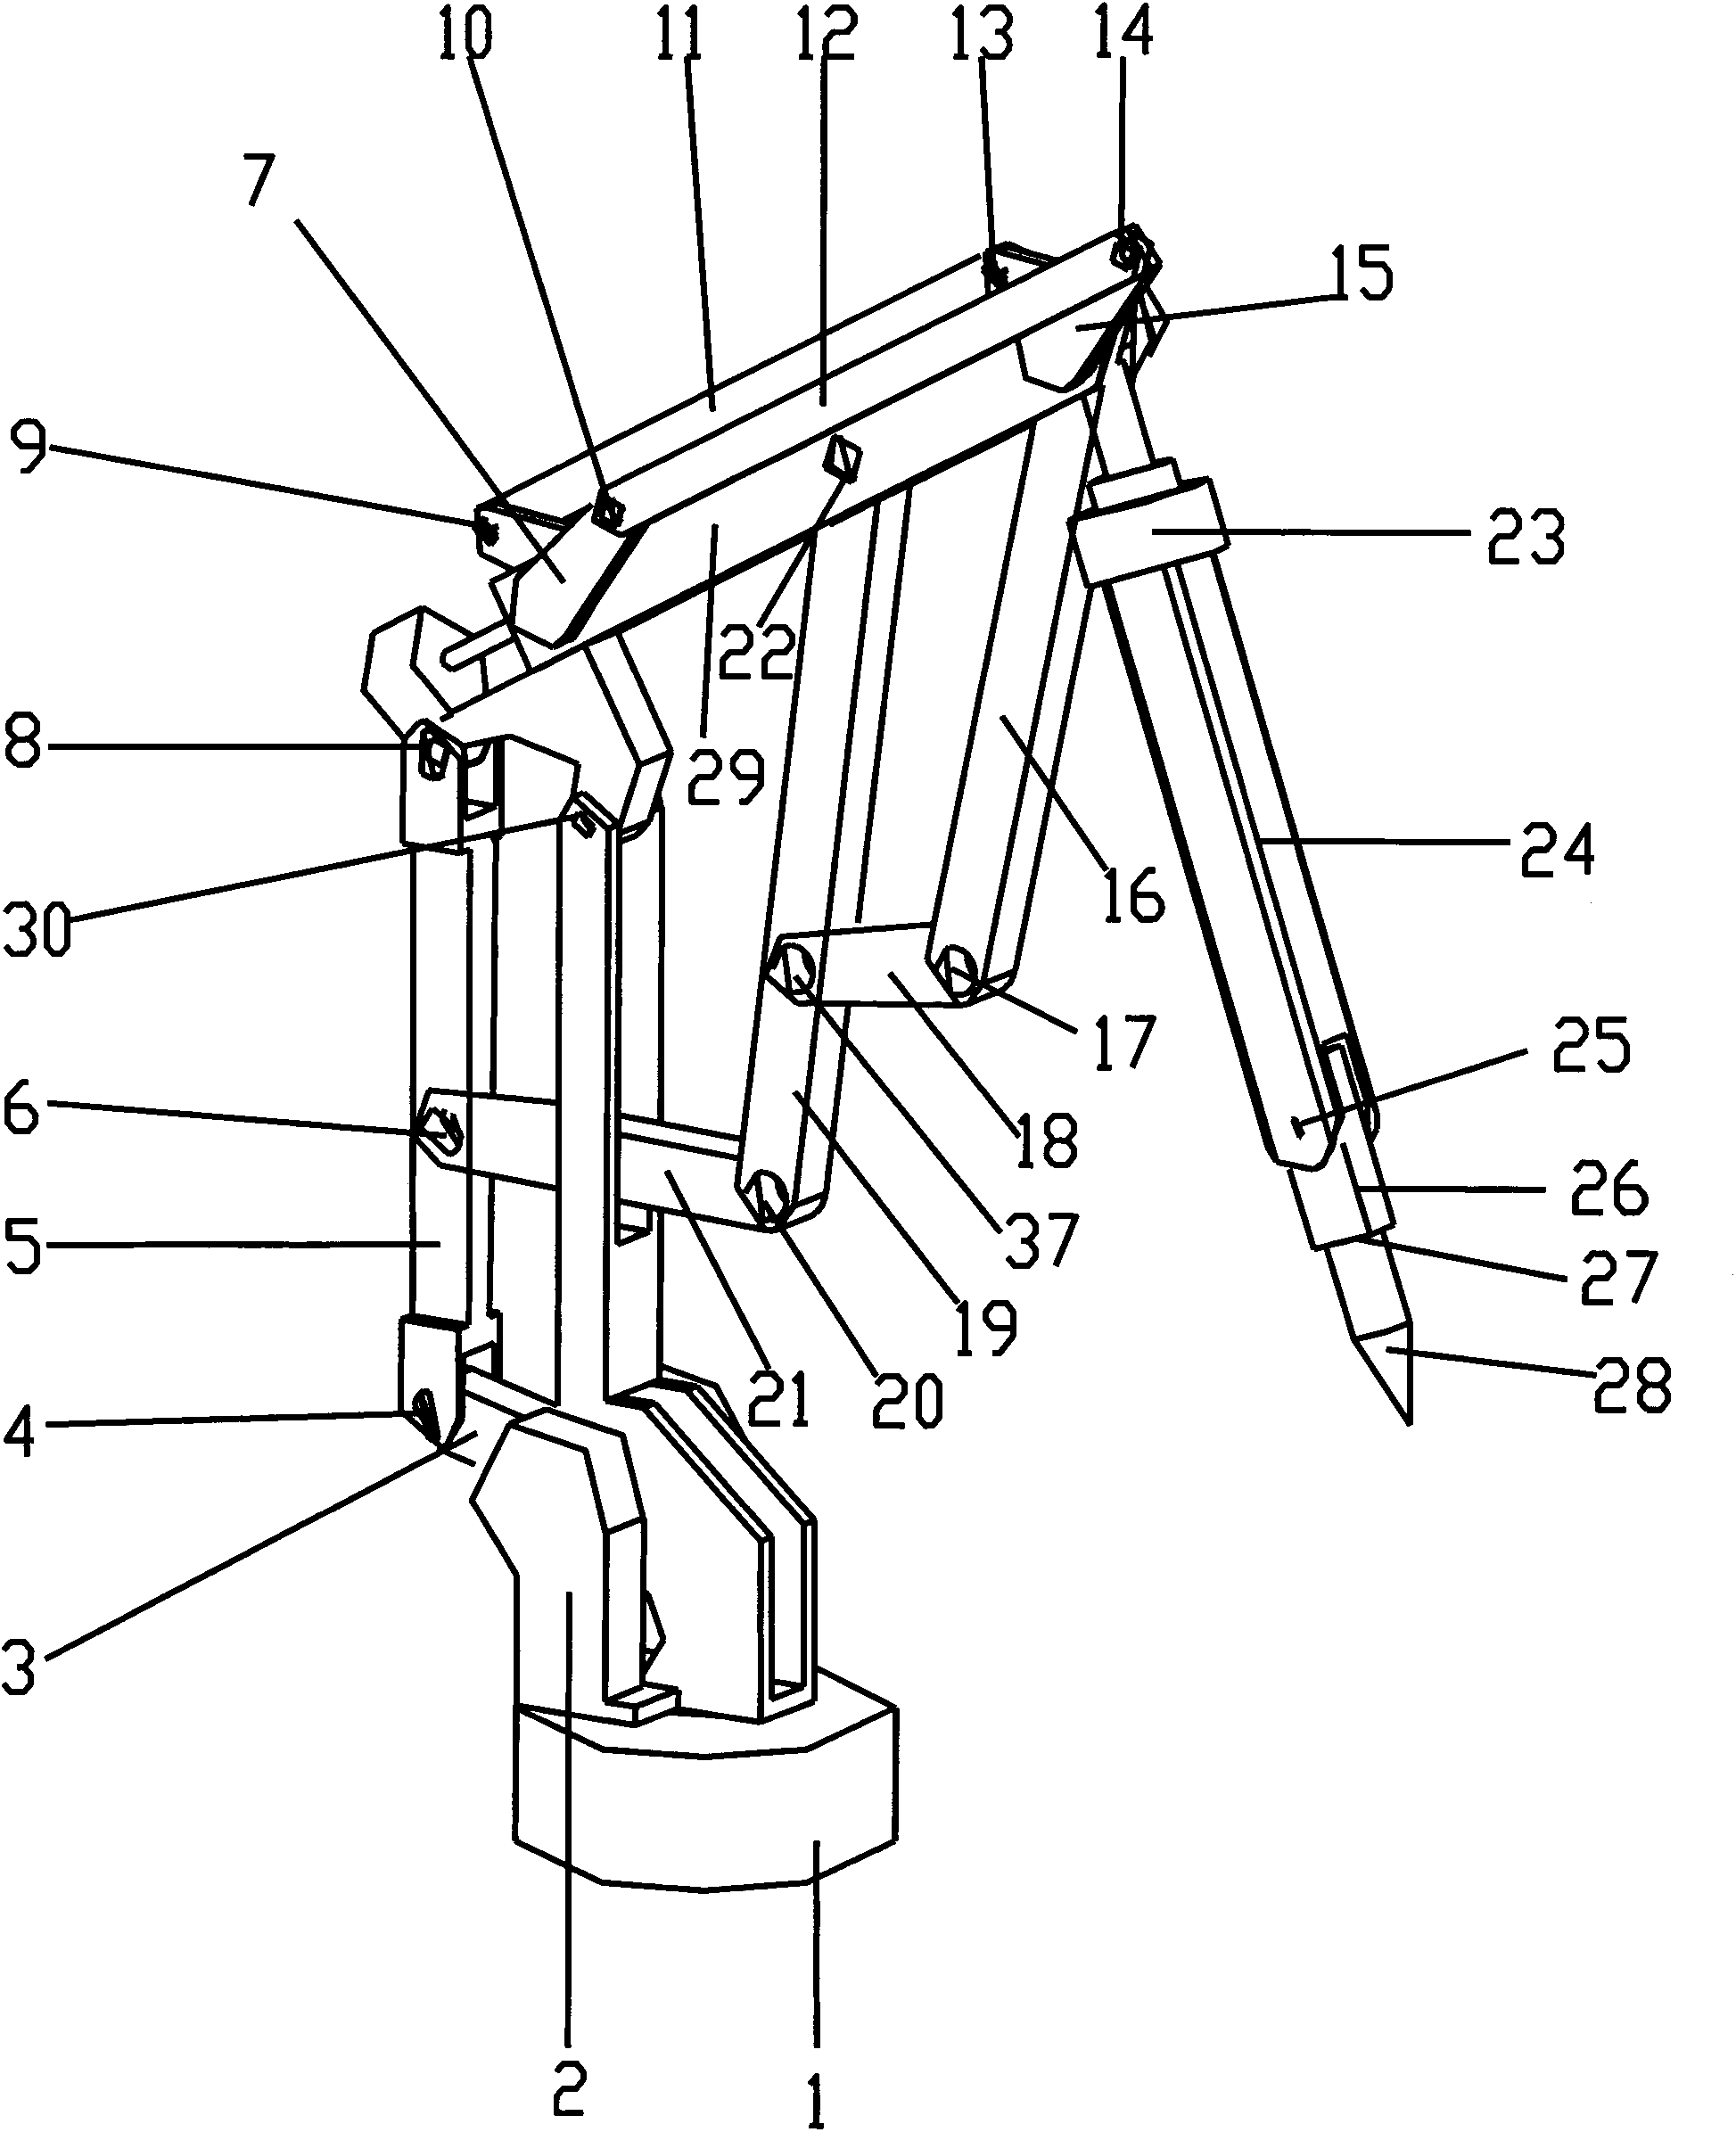 Welding robot with a plurality of closed-ring subchains